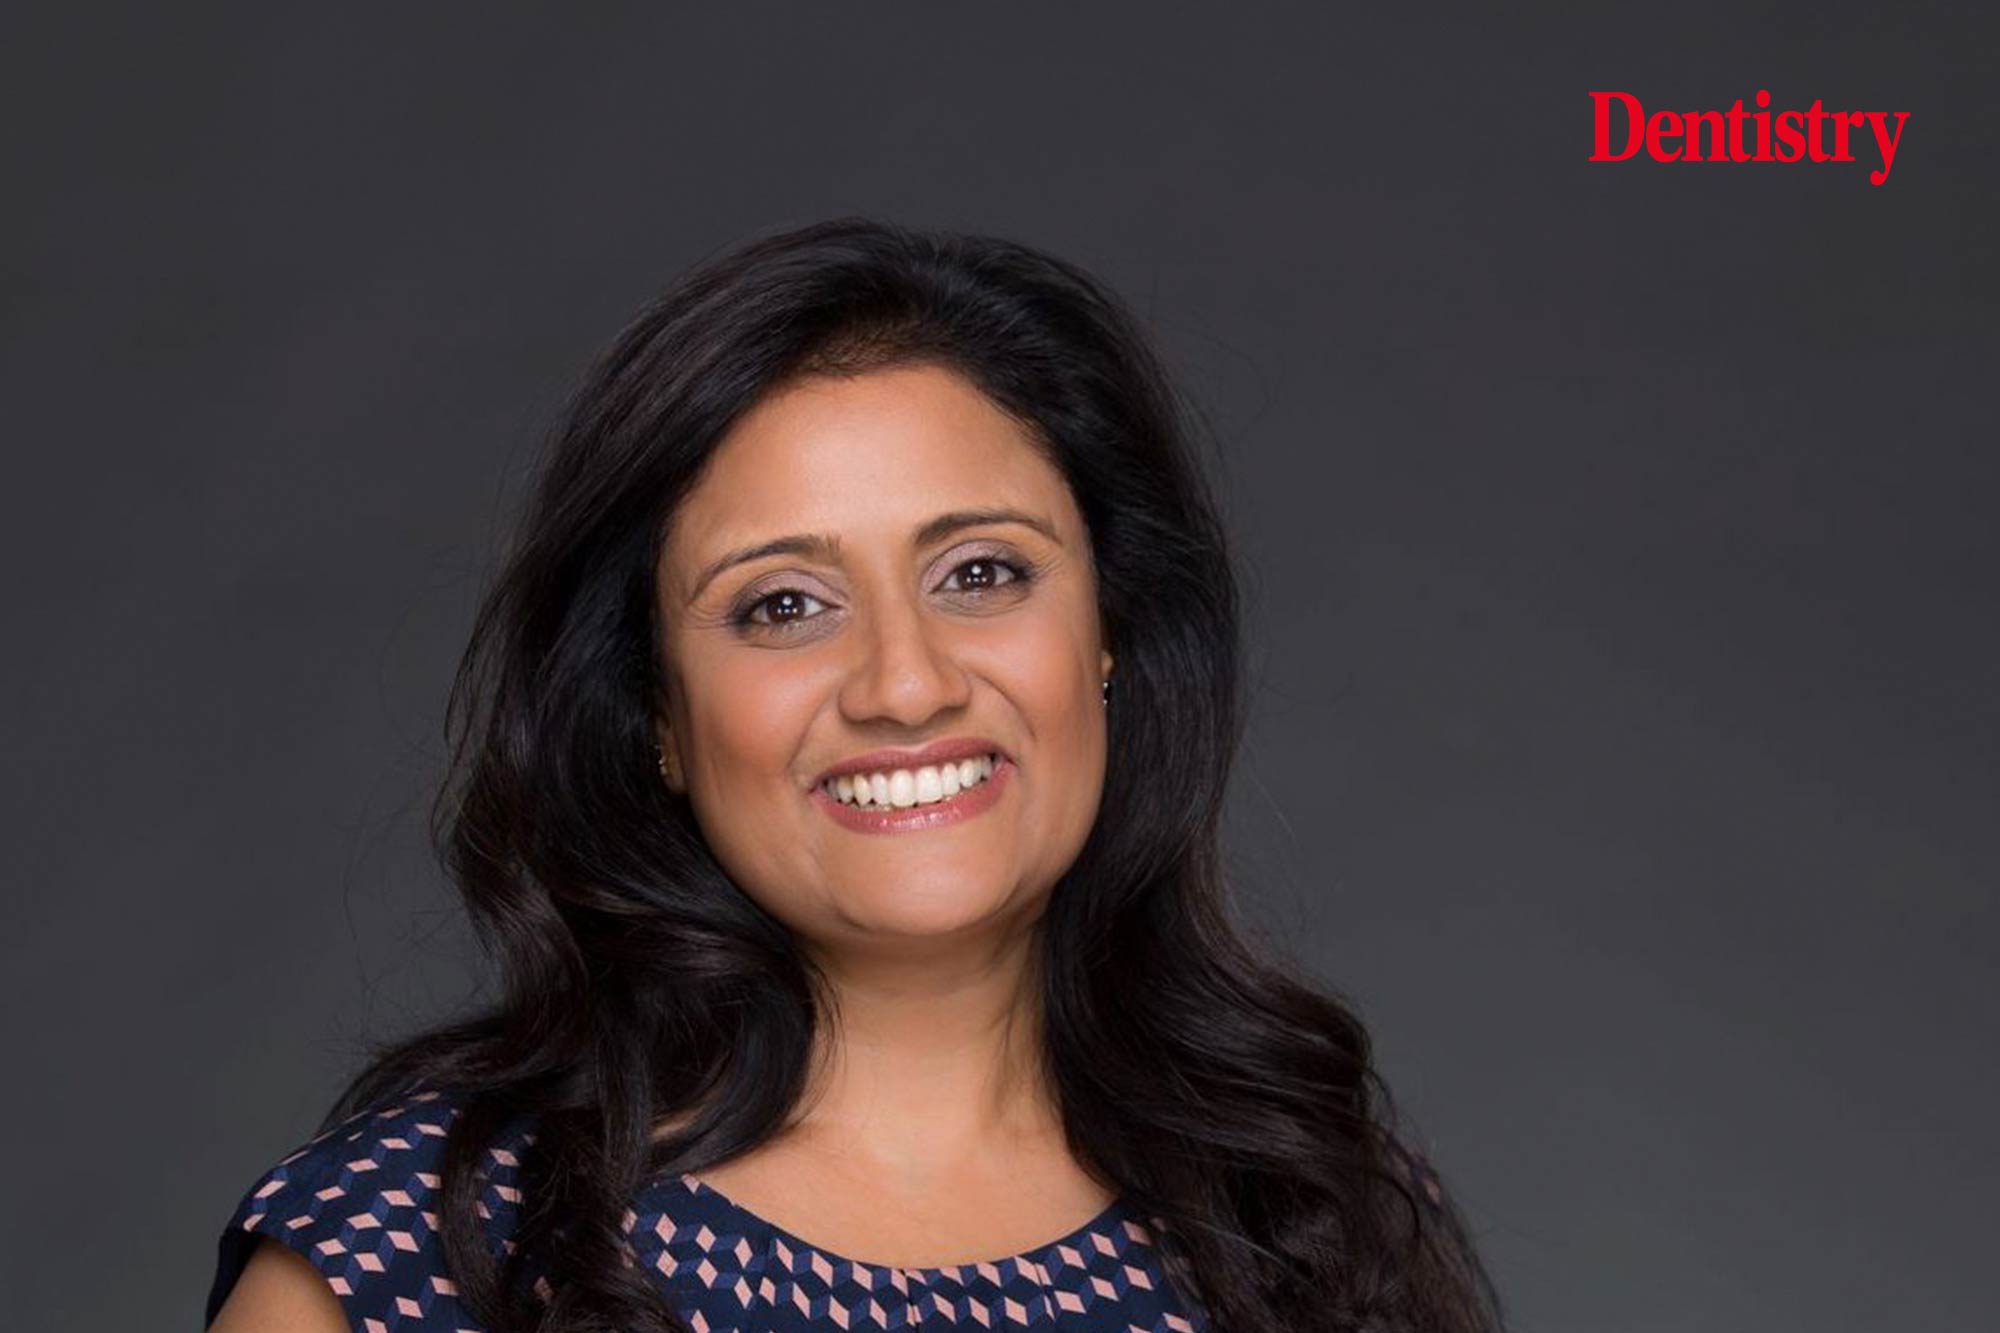 Looking to gain confidence in your leadership skills? Bhavna Doshi shares some tried, tested and proven strategies to help you grow.